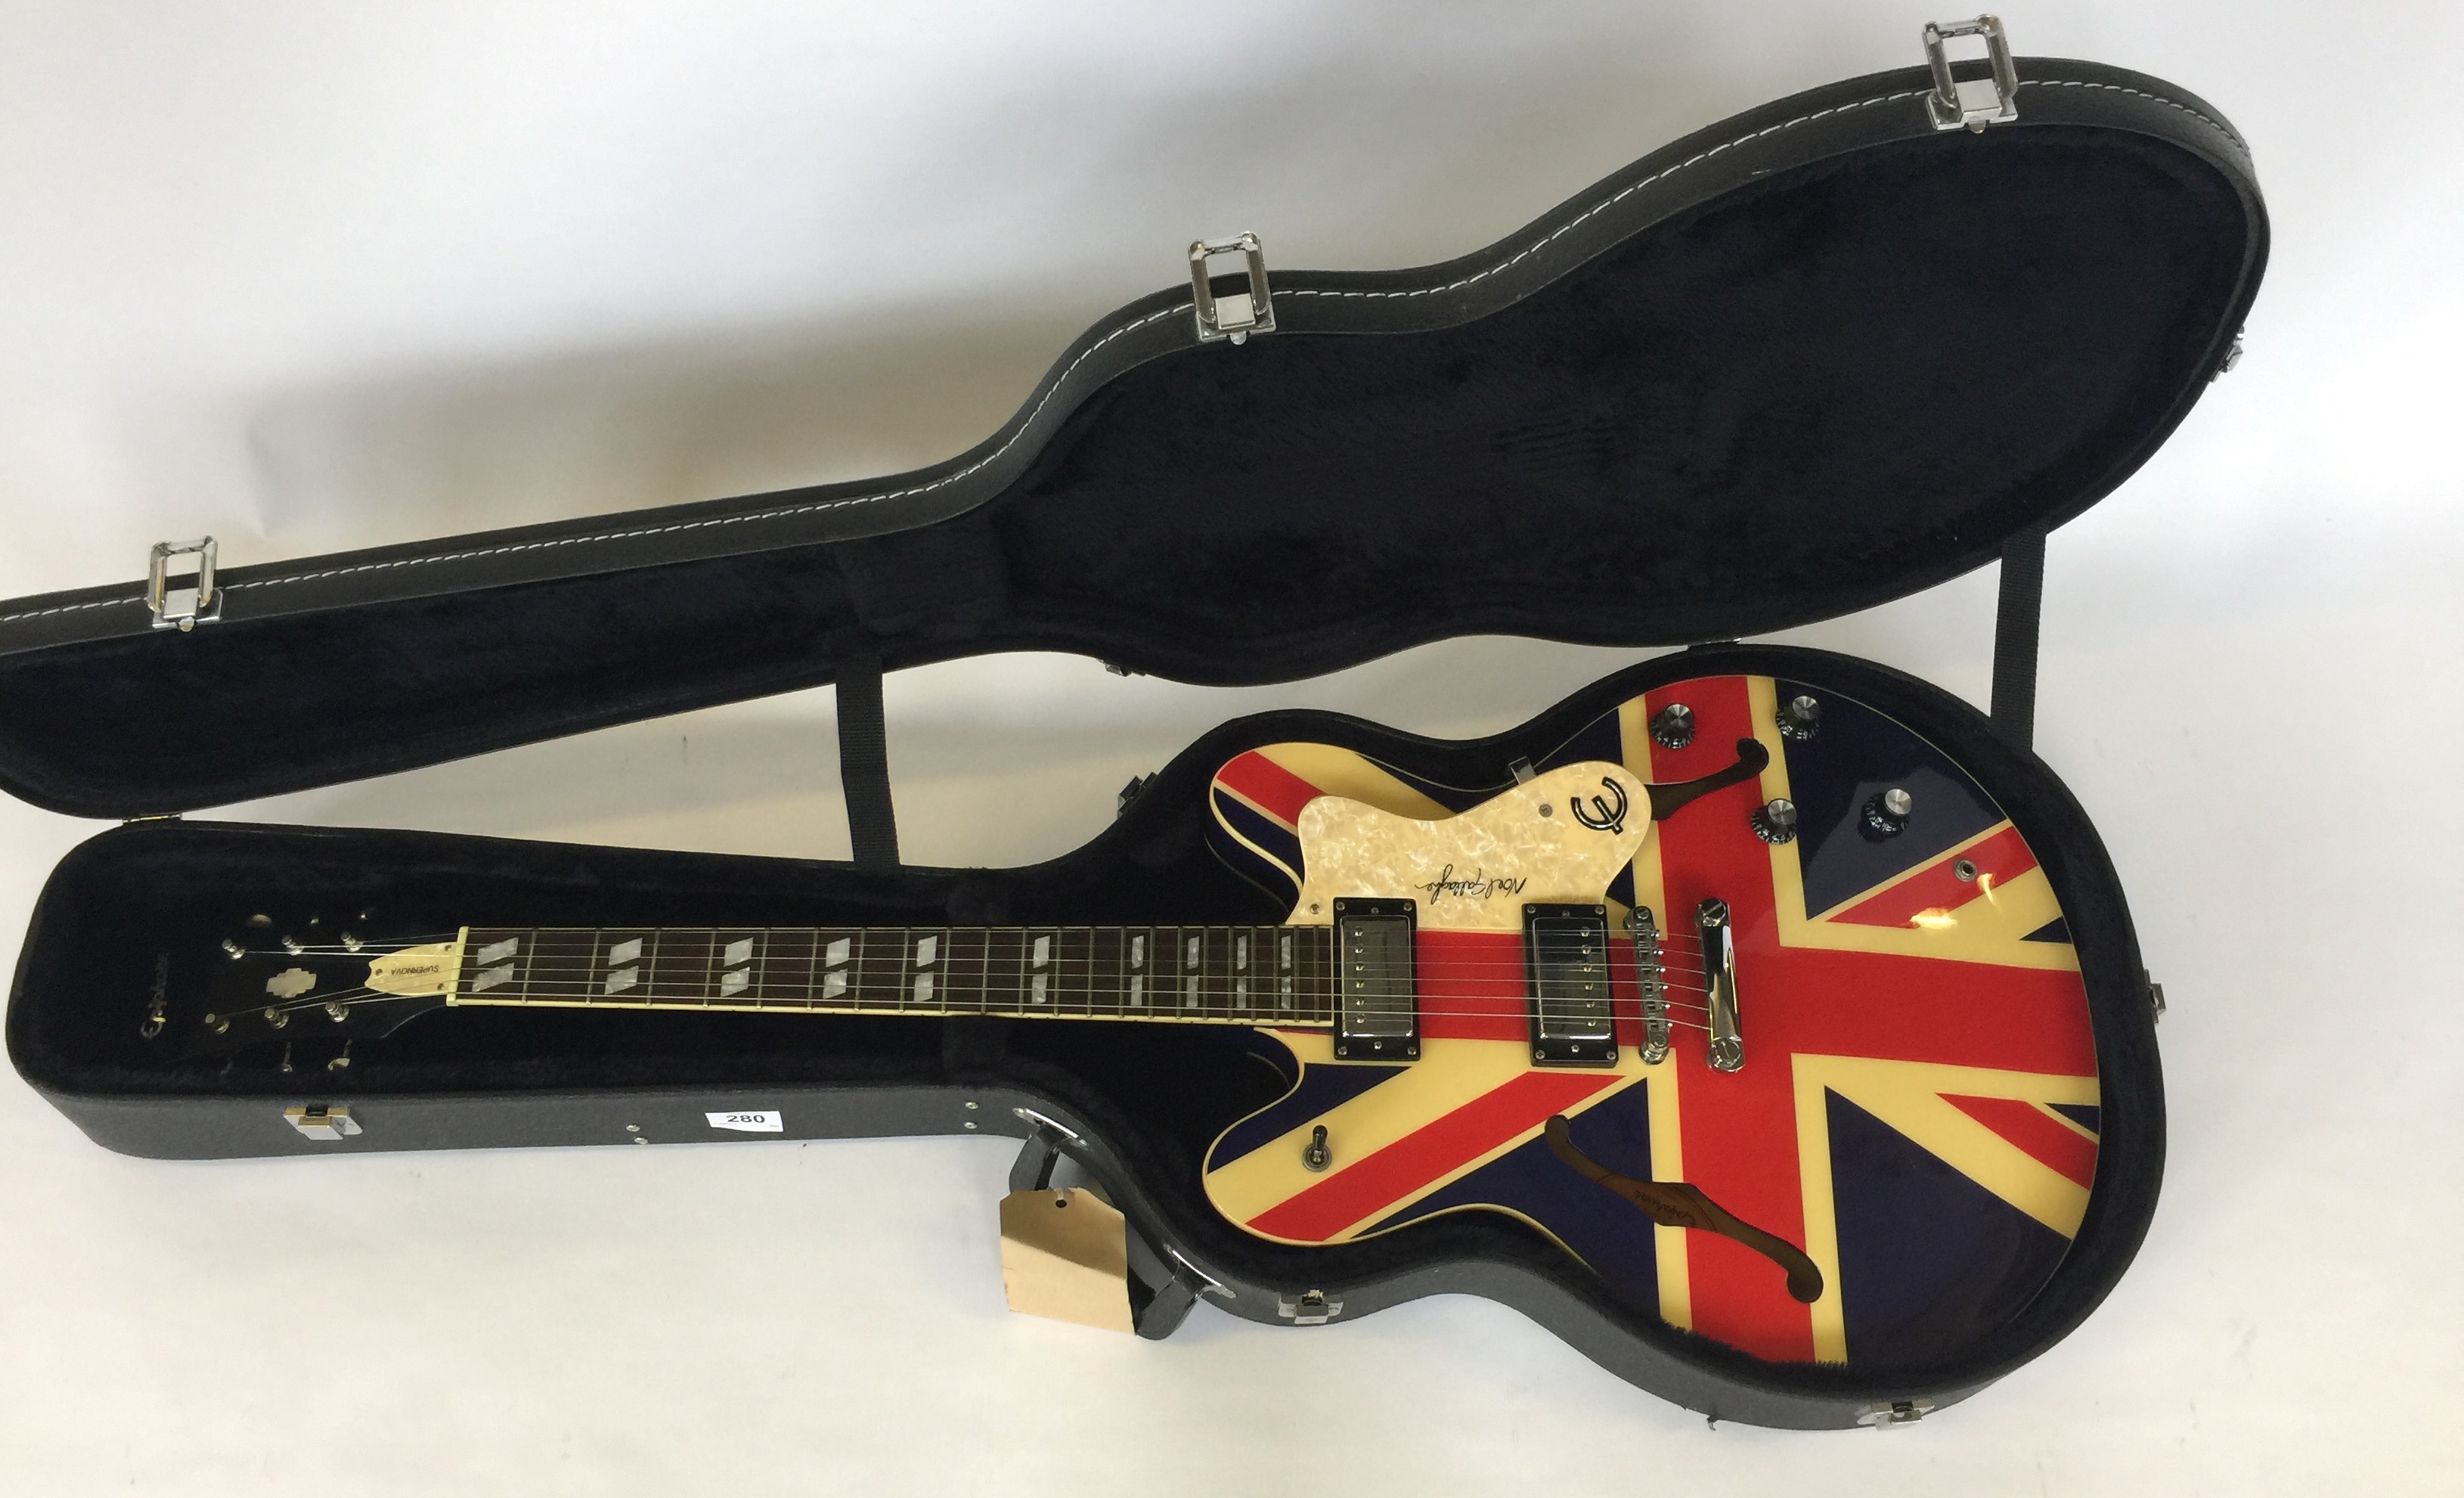 EPIPHONE NOEL GALLAGHER SUPERNOVA - electric guitar - a must for any guitar playing Oasis fan! - Image 6 of 8